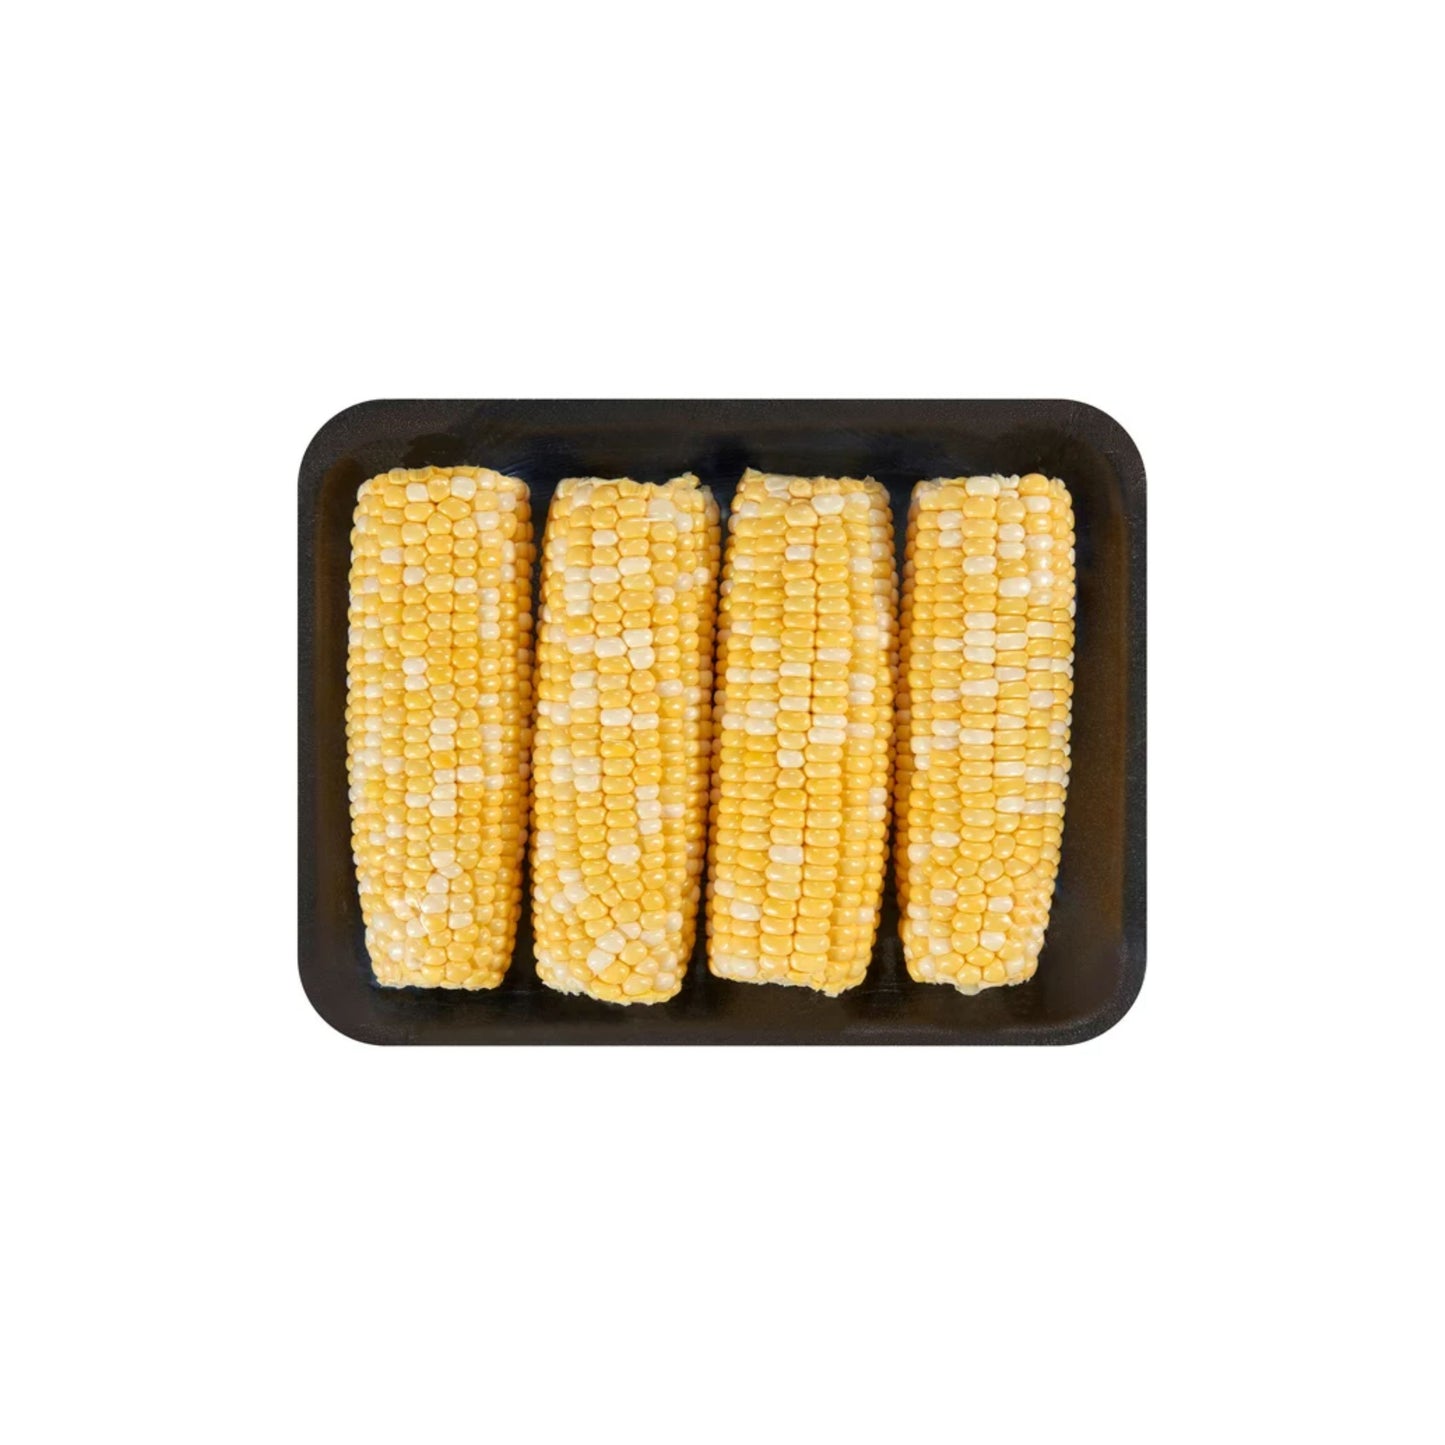 Corn-On-The-Cob (Pre-Shucked) 3 Pack